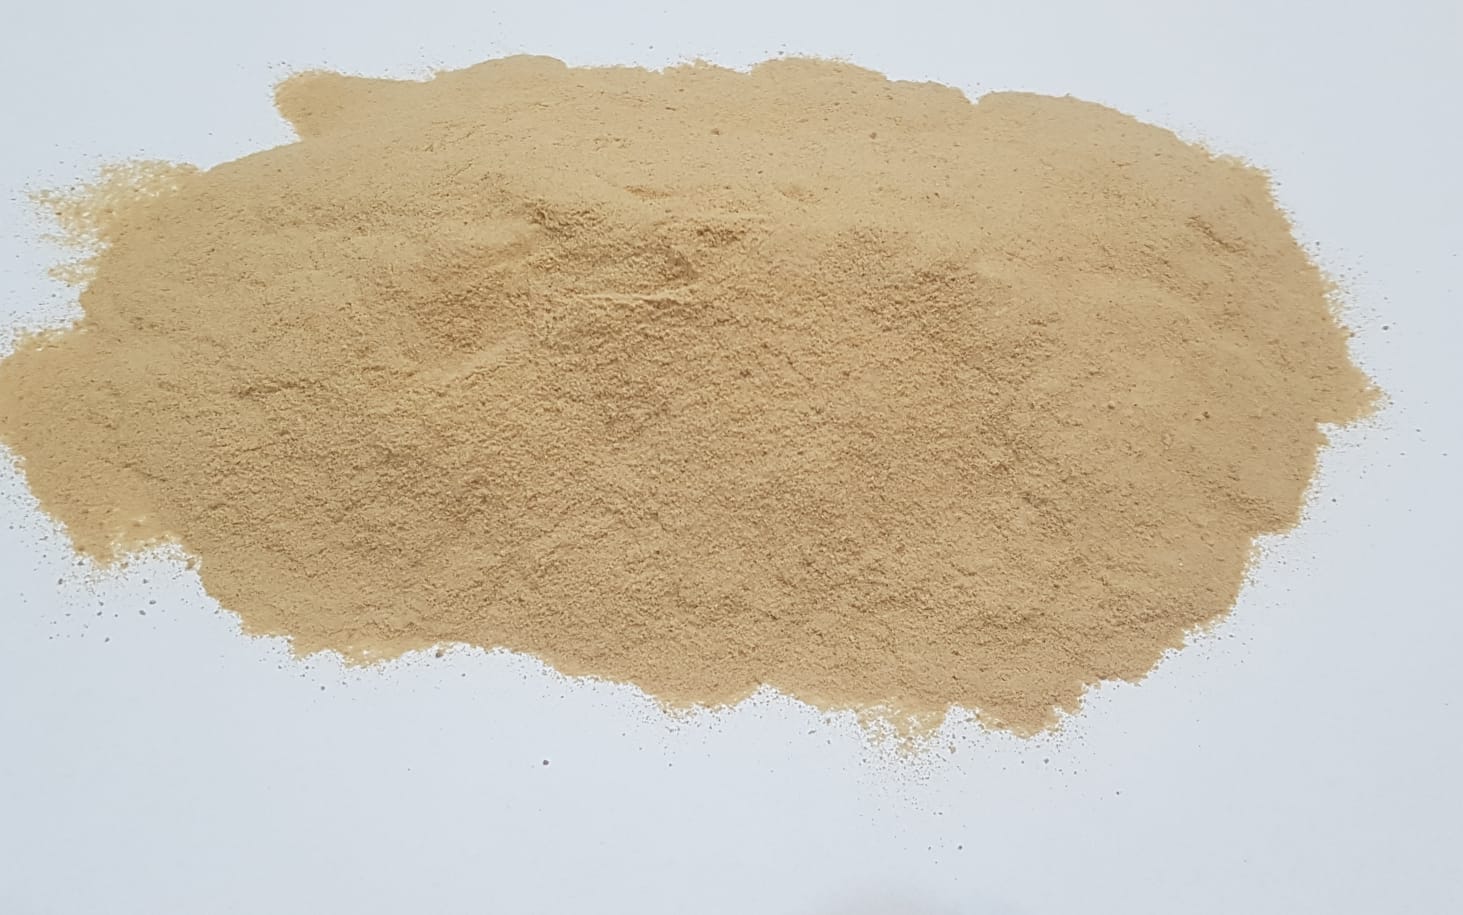 dry brewers yeast SACCHAROMYCES CEREVISIAE